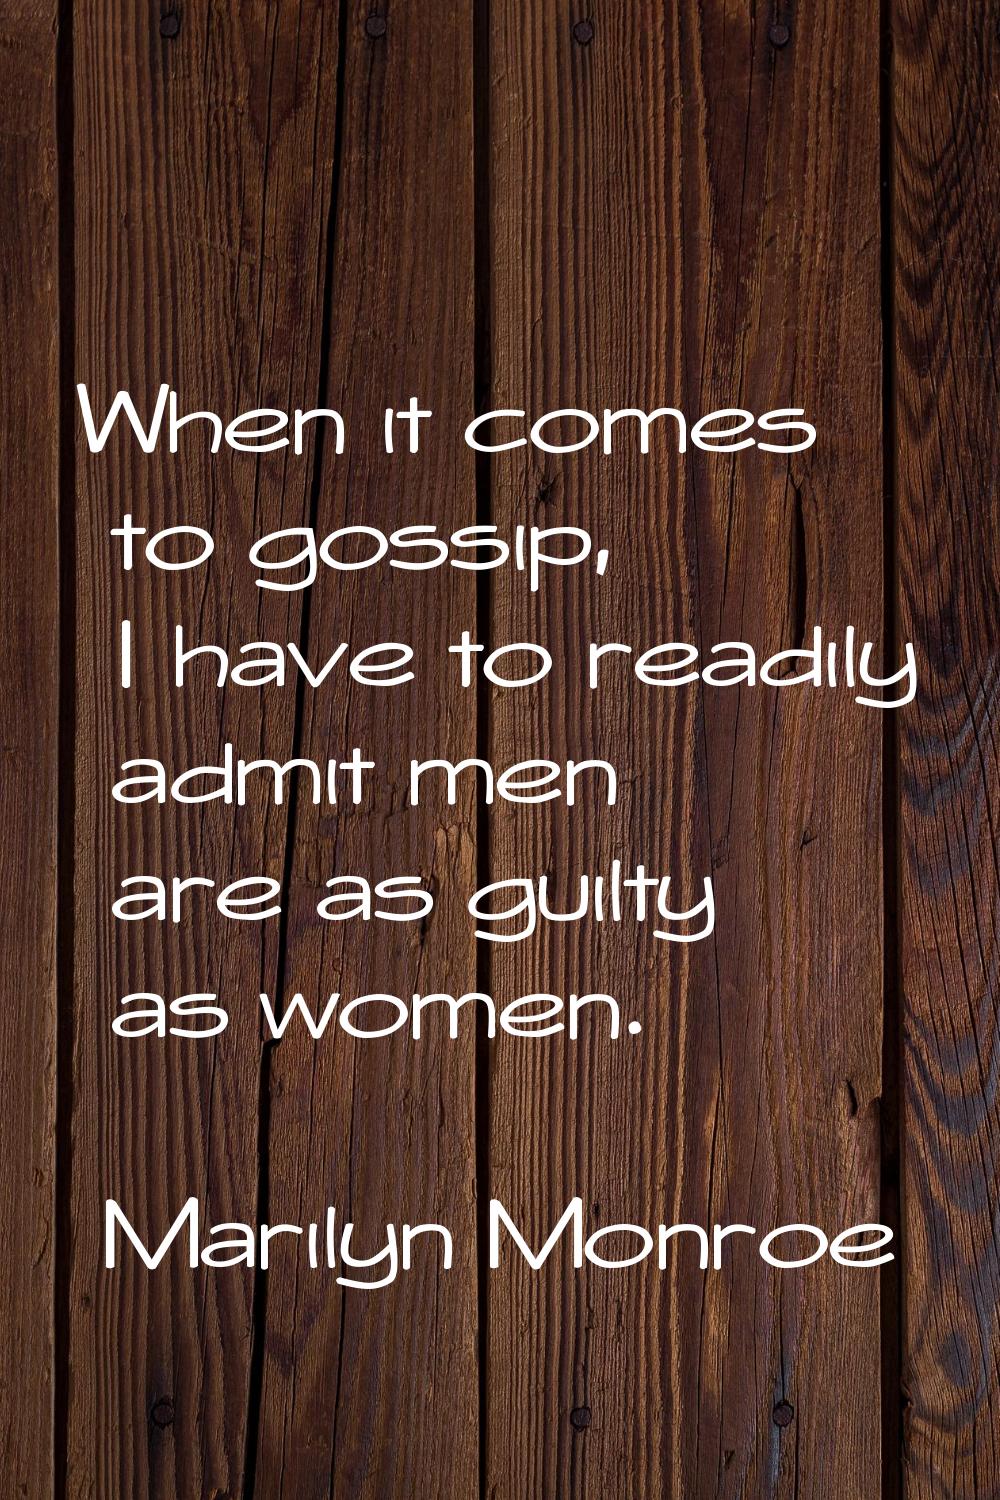 When it comes to gossip, I have to readily admit men are as guilty as women.